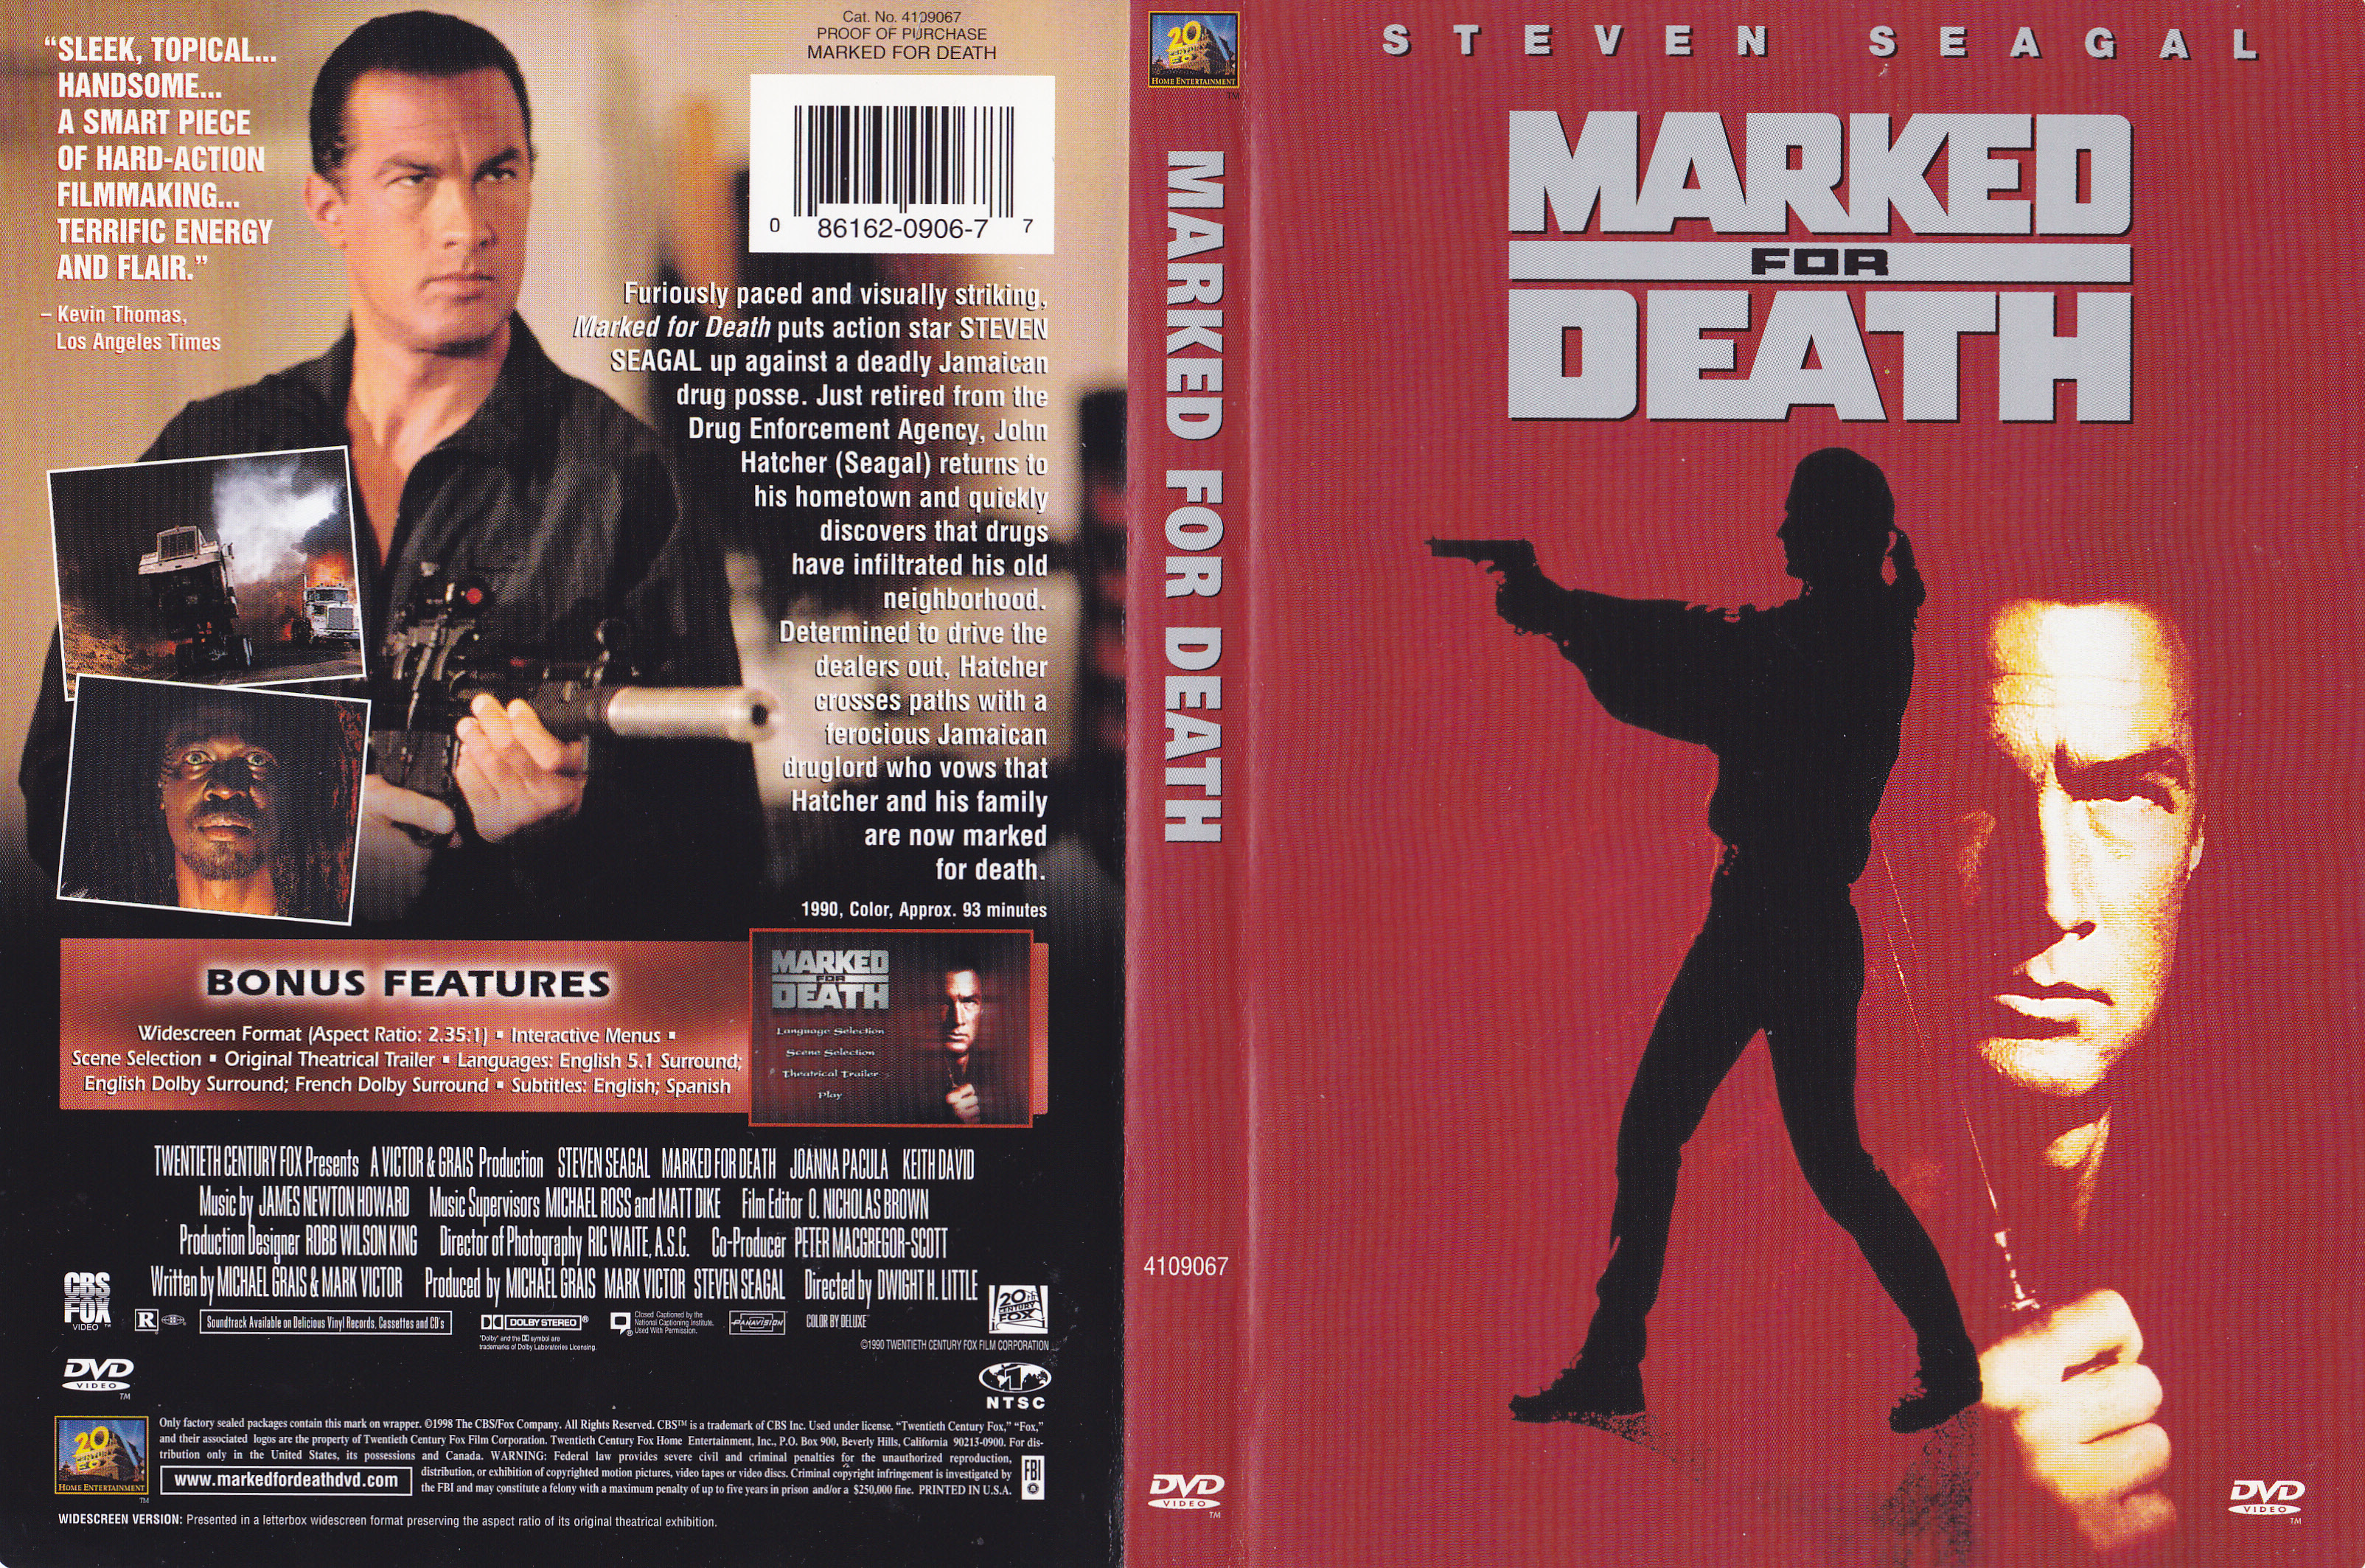 Jaquette DVD Marked for death - Dsign pour mourir (Canadienne)